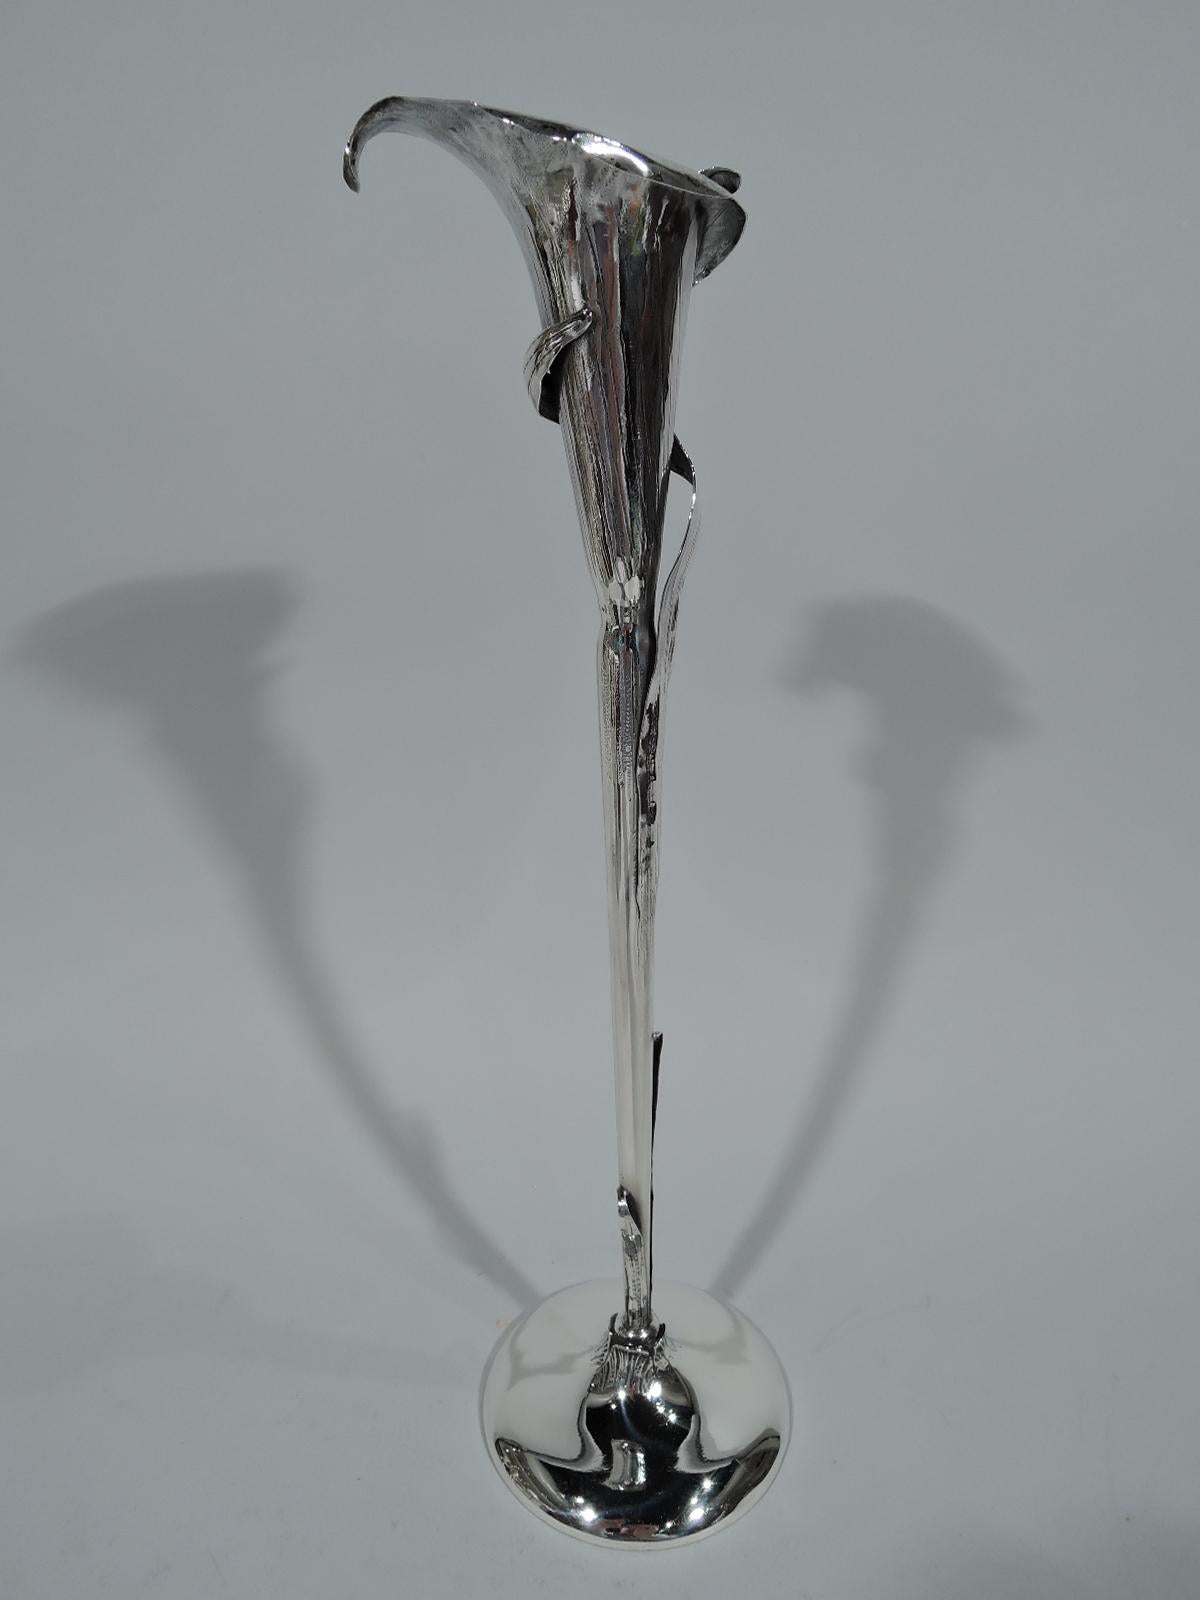 Aesthetic sterling silver vase. Made by Redlich in New York, circa 1900. Tall and narrow in form of calla lily with irregular petals and climbing, wrapping leaves. The stem appears to burst from “ground” of domed foot. A wonderful period piece that